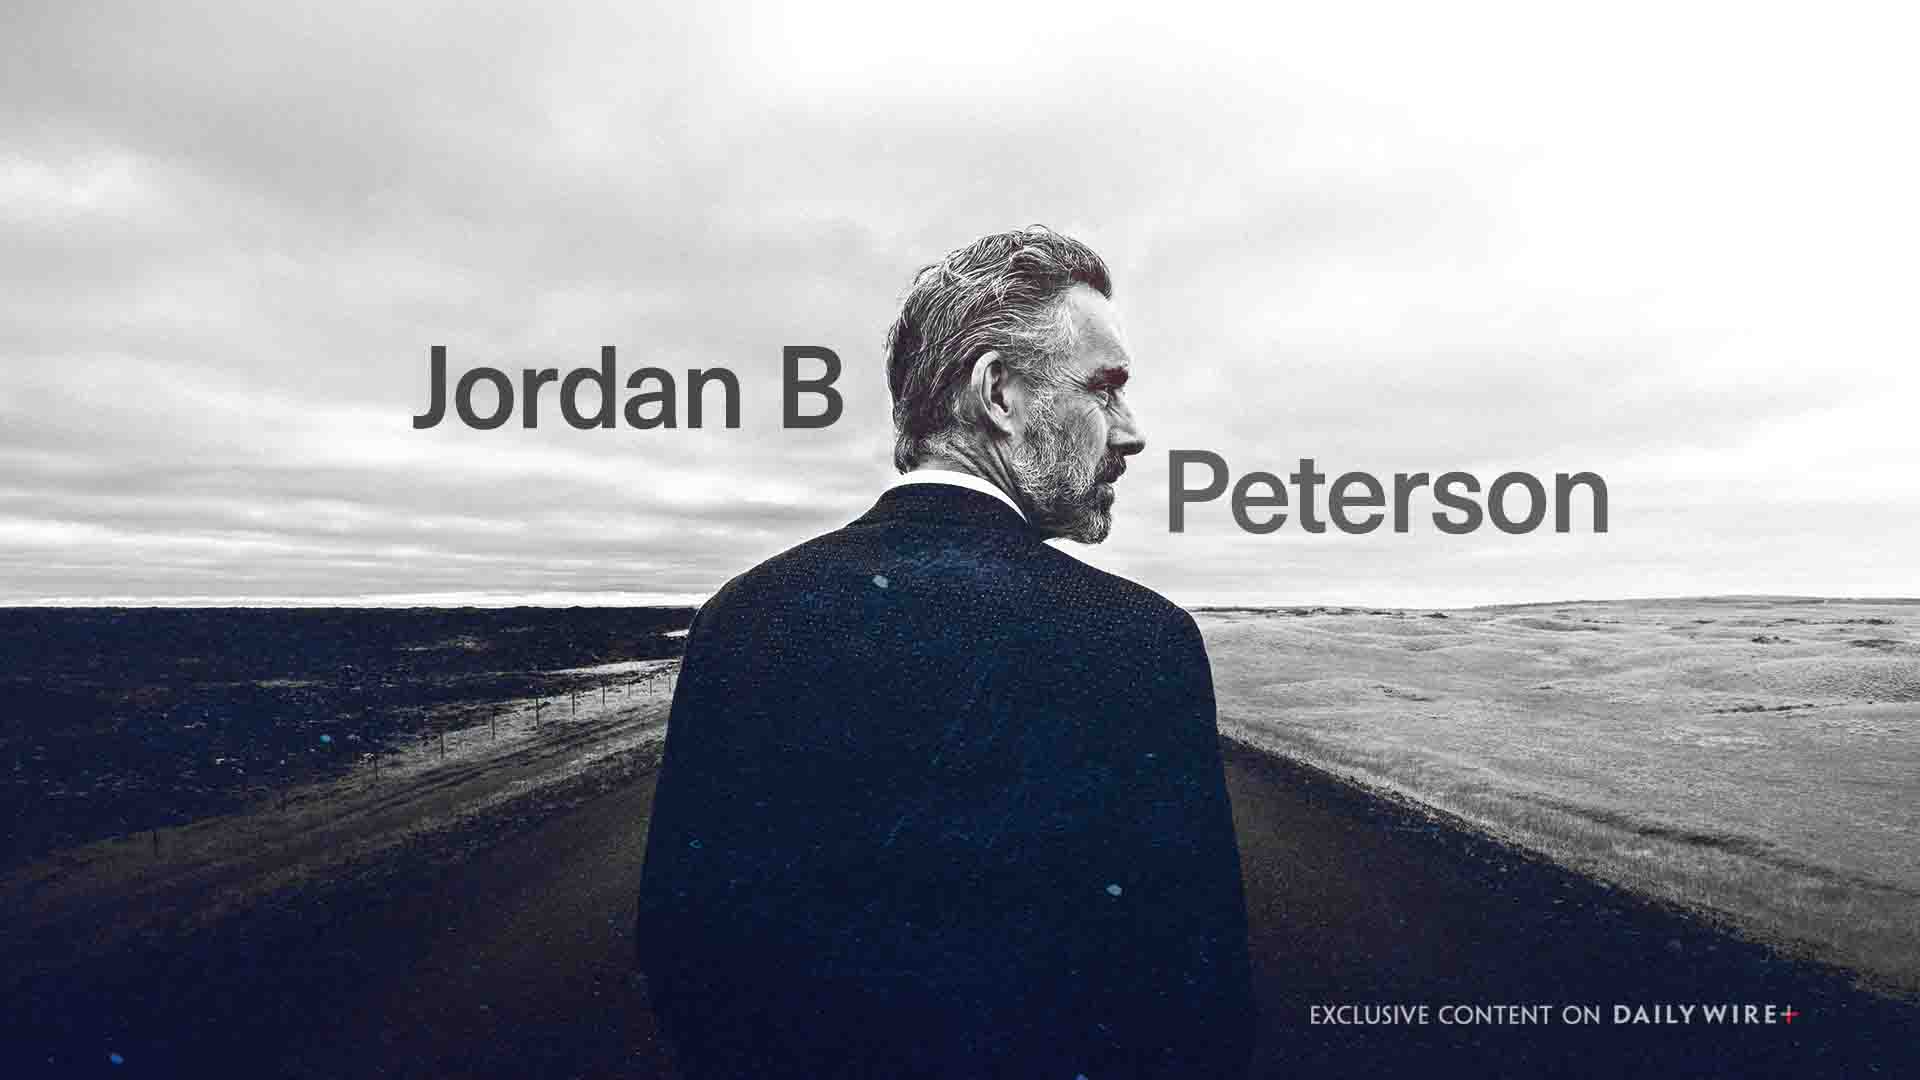 16 Facts About Jordan Peterson:The Influential Professor- Facts.net